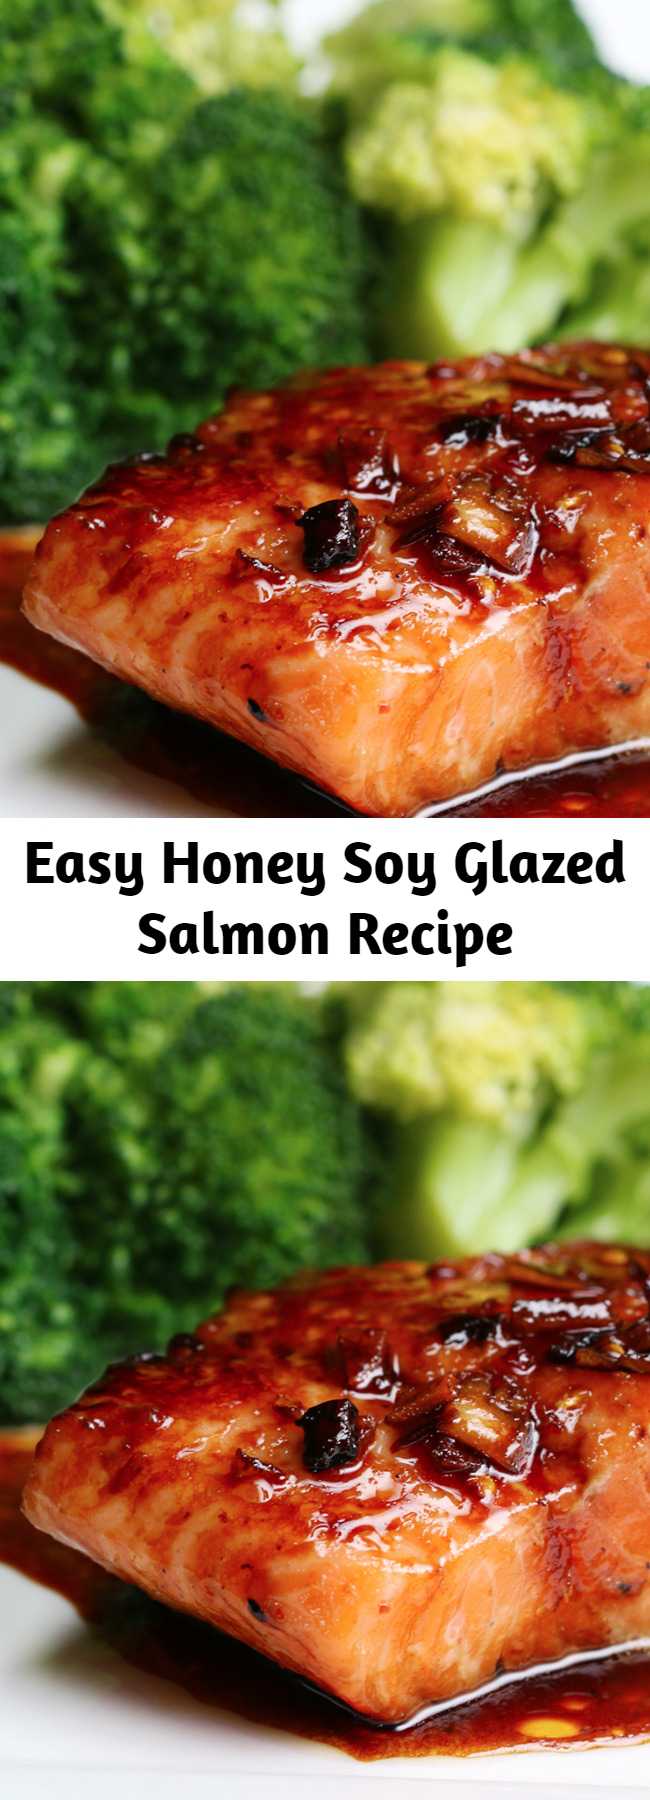 Easy Honey Soy Glazed Salmon Recipe - Honey Soy Glazed Salmon Recipe - Two words: honey salmon! Sure, it takes a tiny bit of prep work, but once you marinate your salmon, you won’t be able to go back.